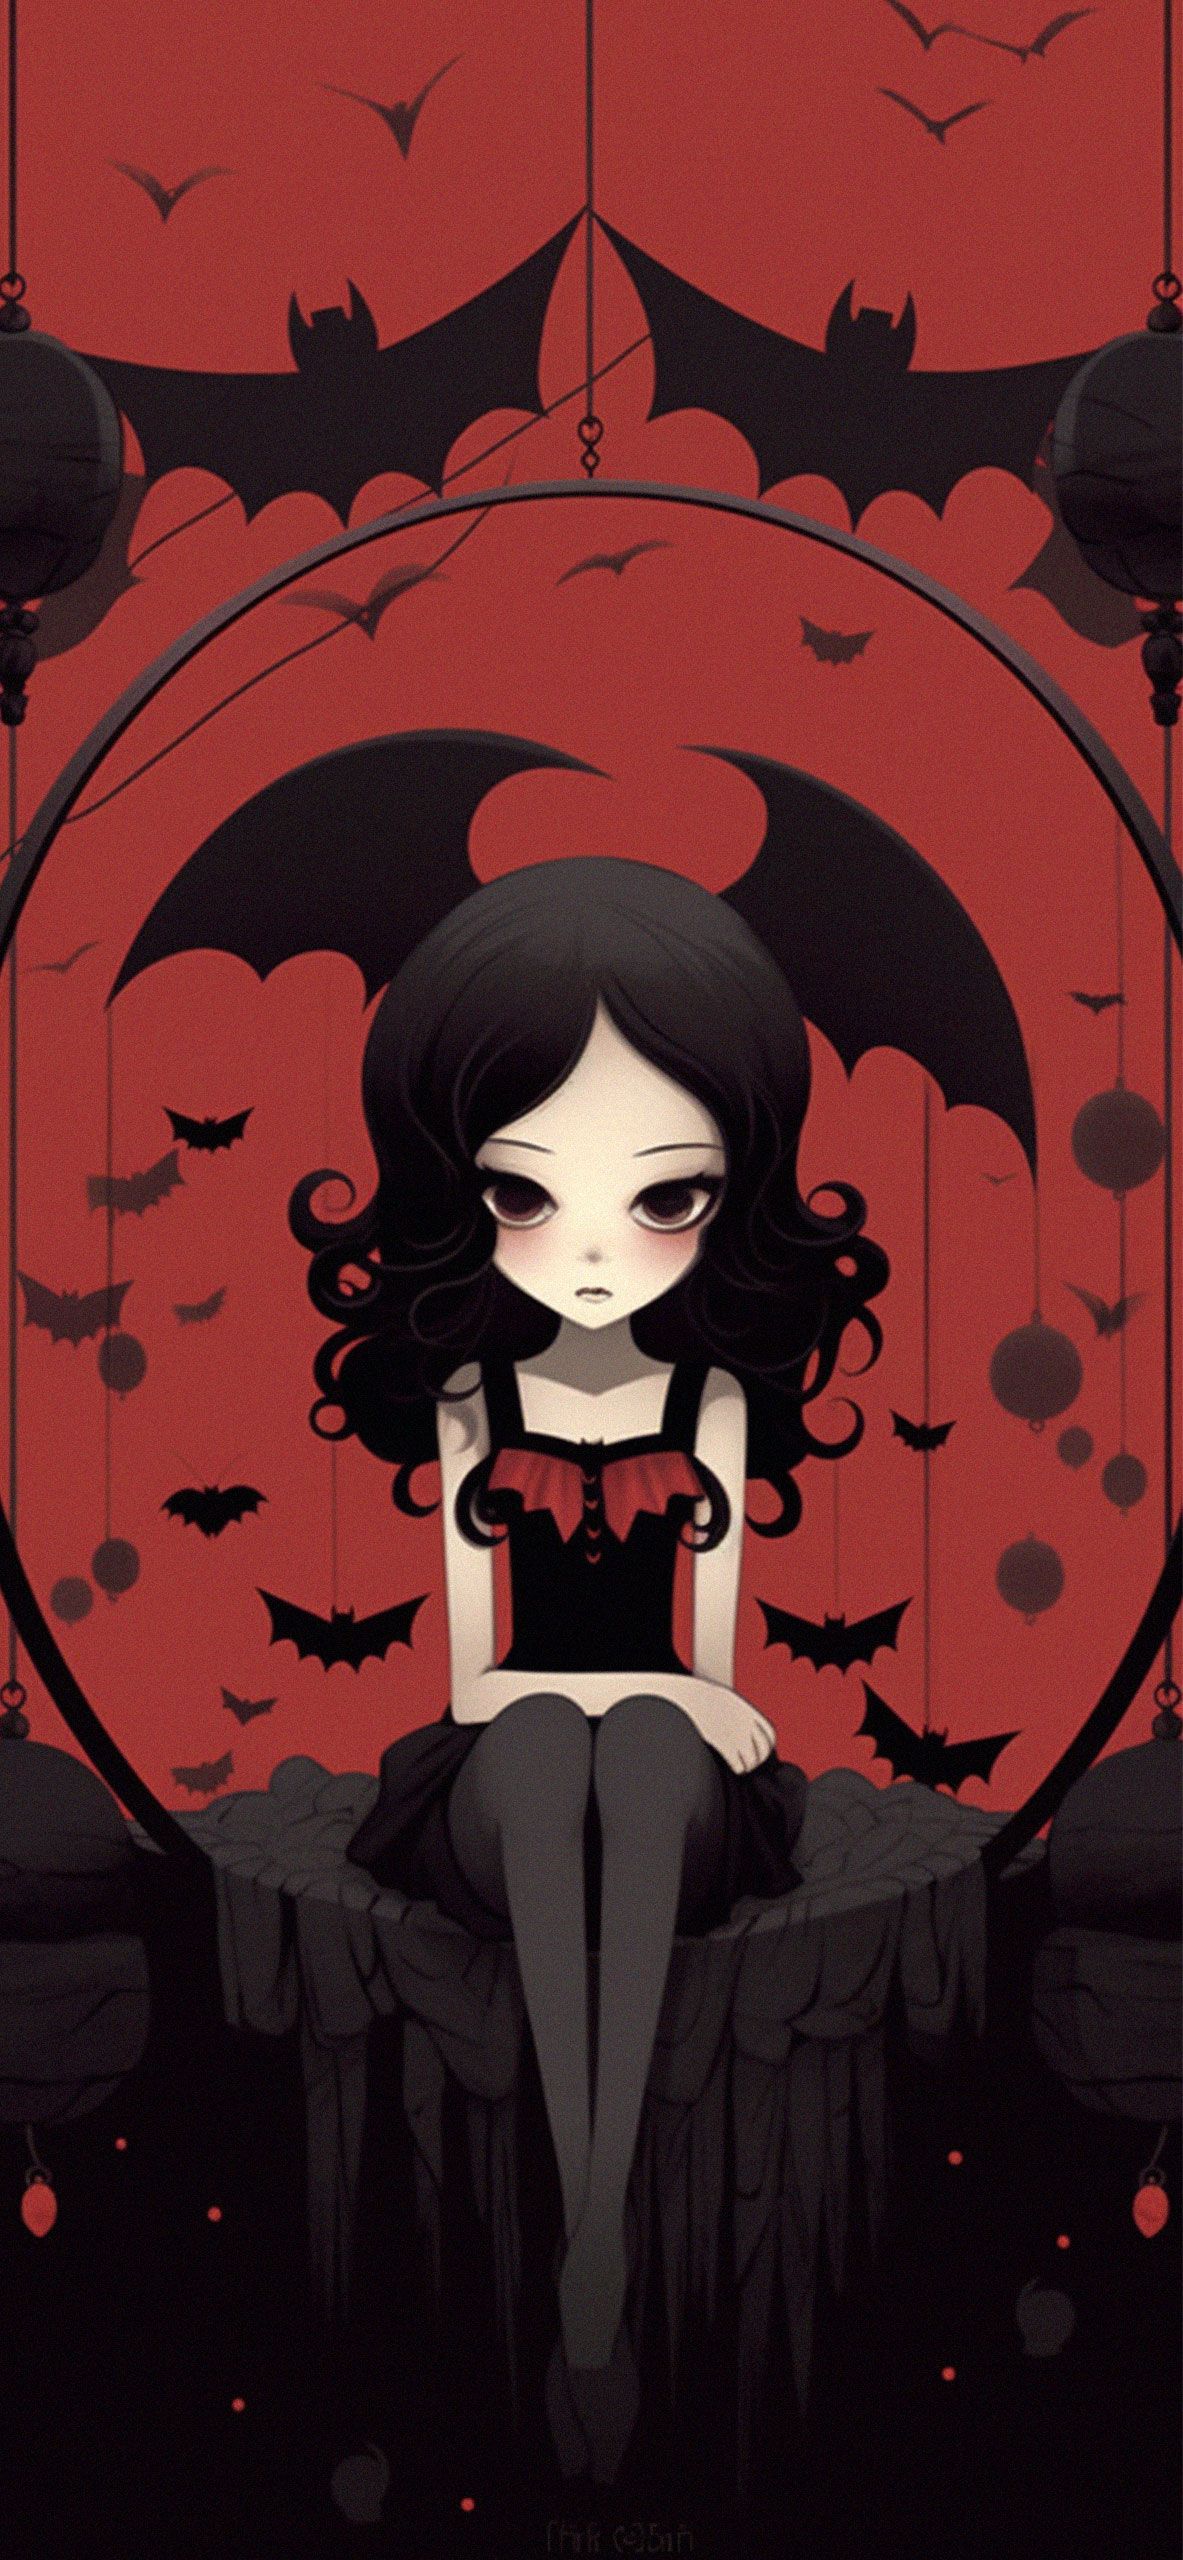 A black haired girl sits on a stone throne with bats surrounding her. - Vampire